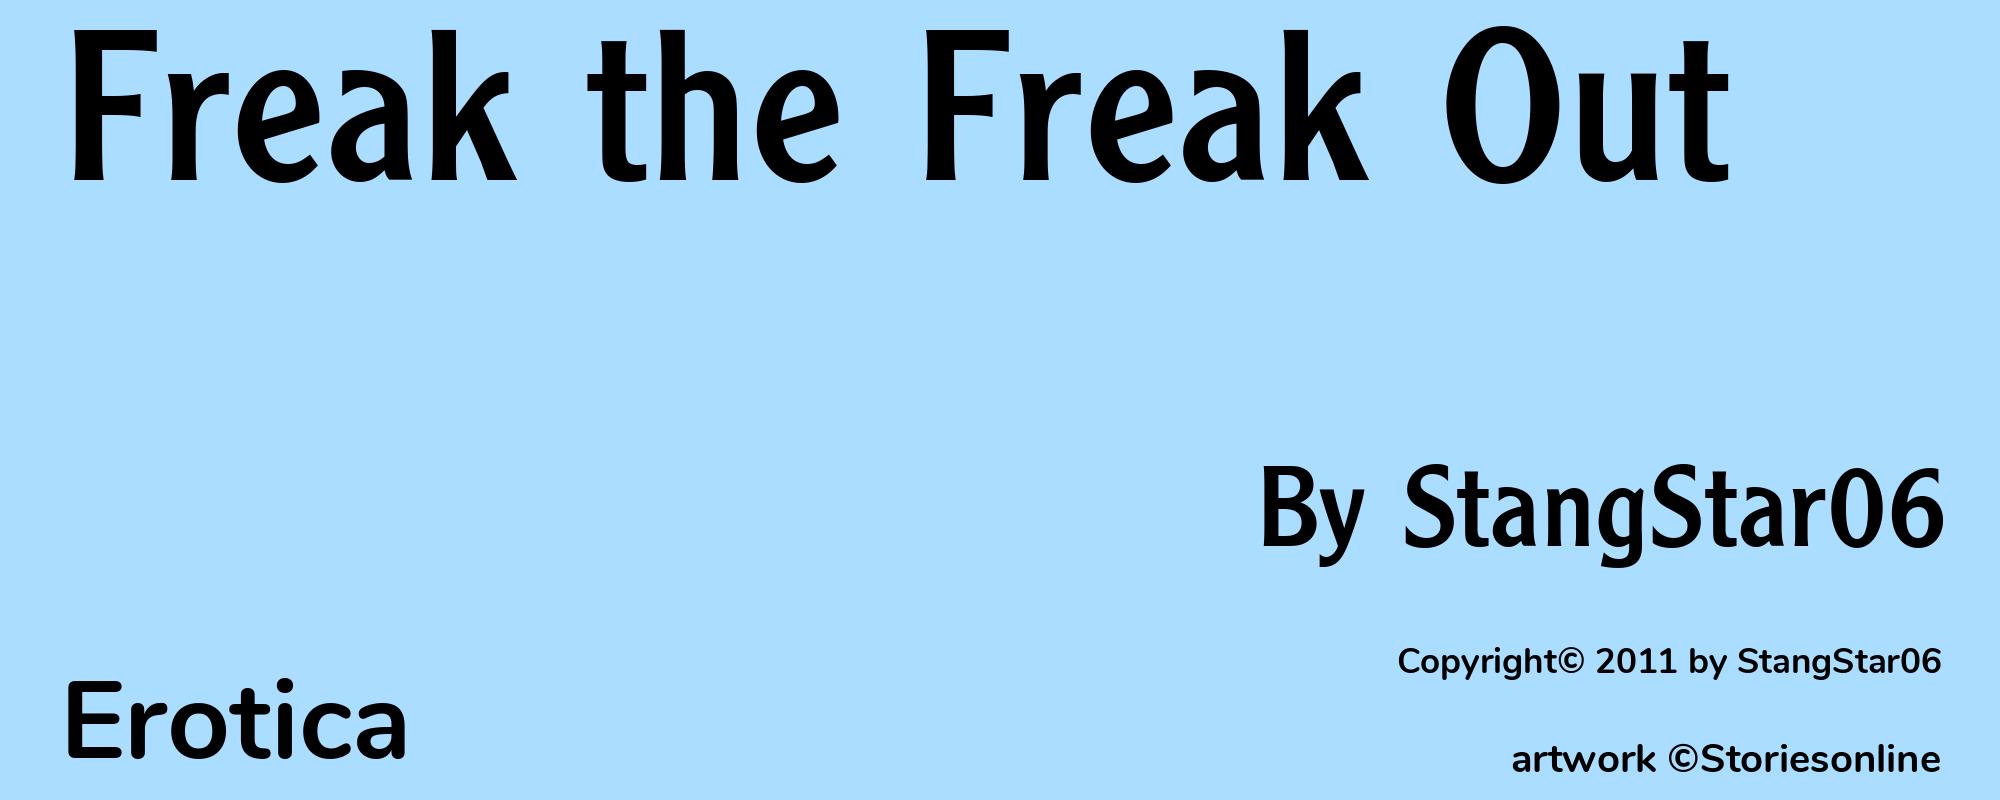 Freak the Freak Out - Cover